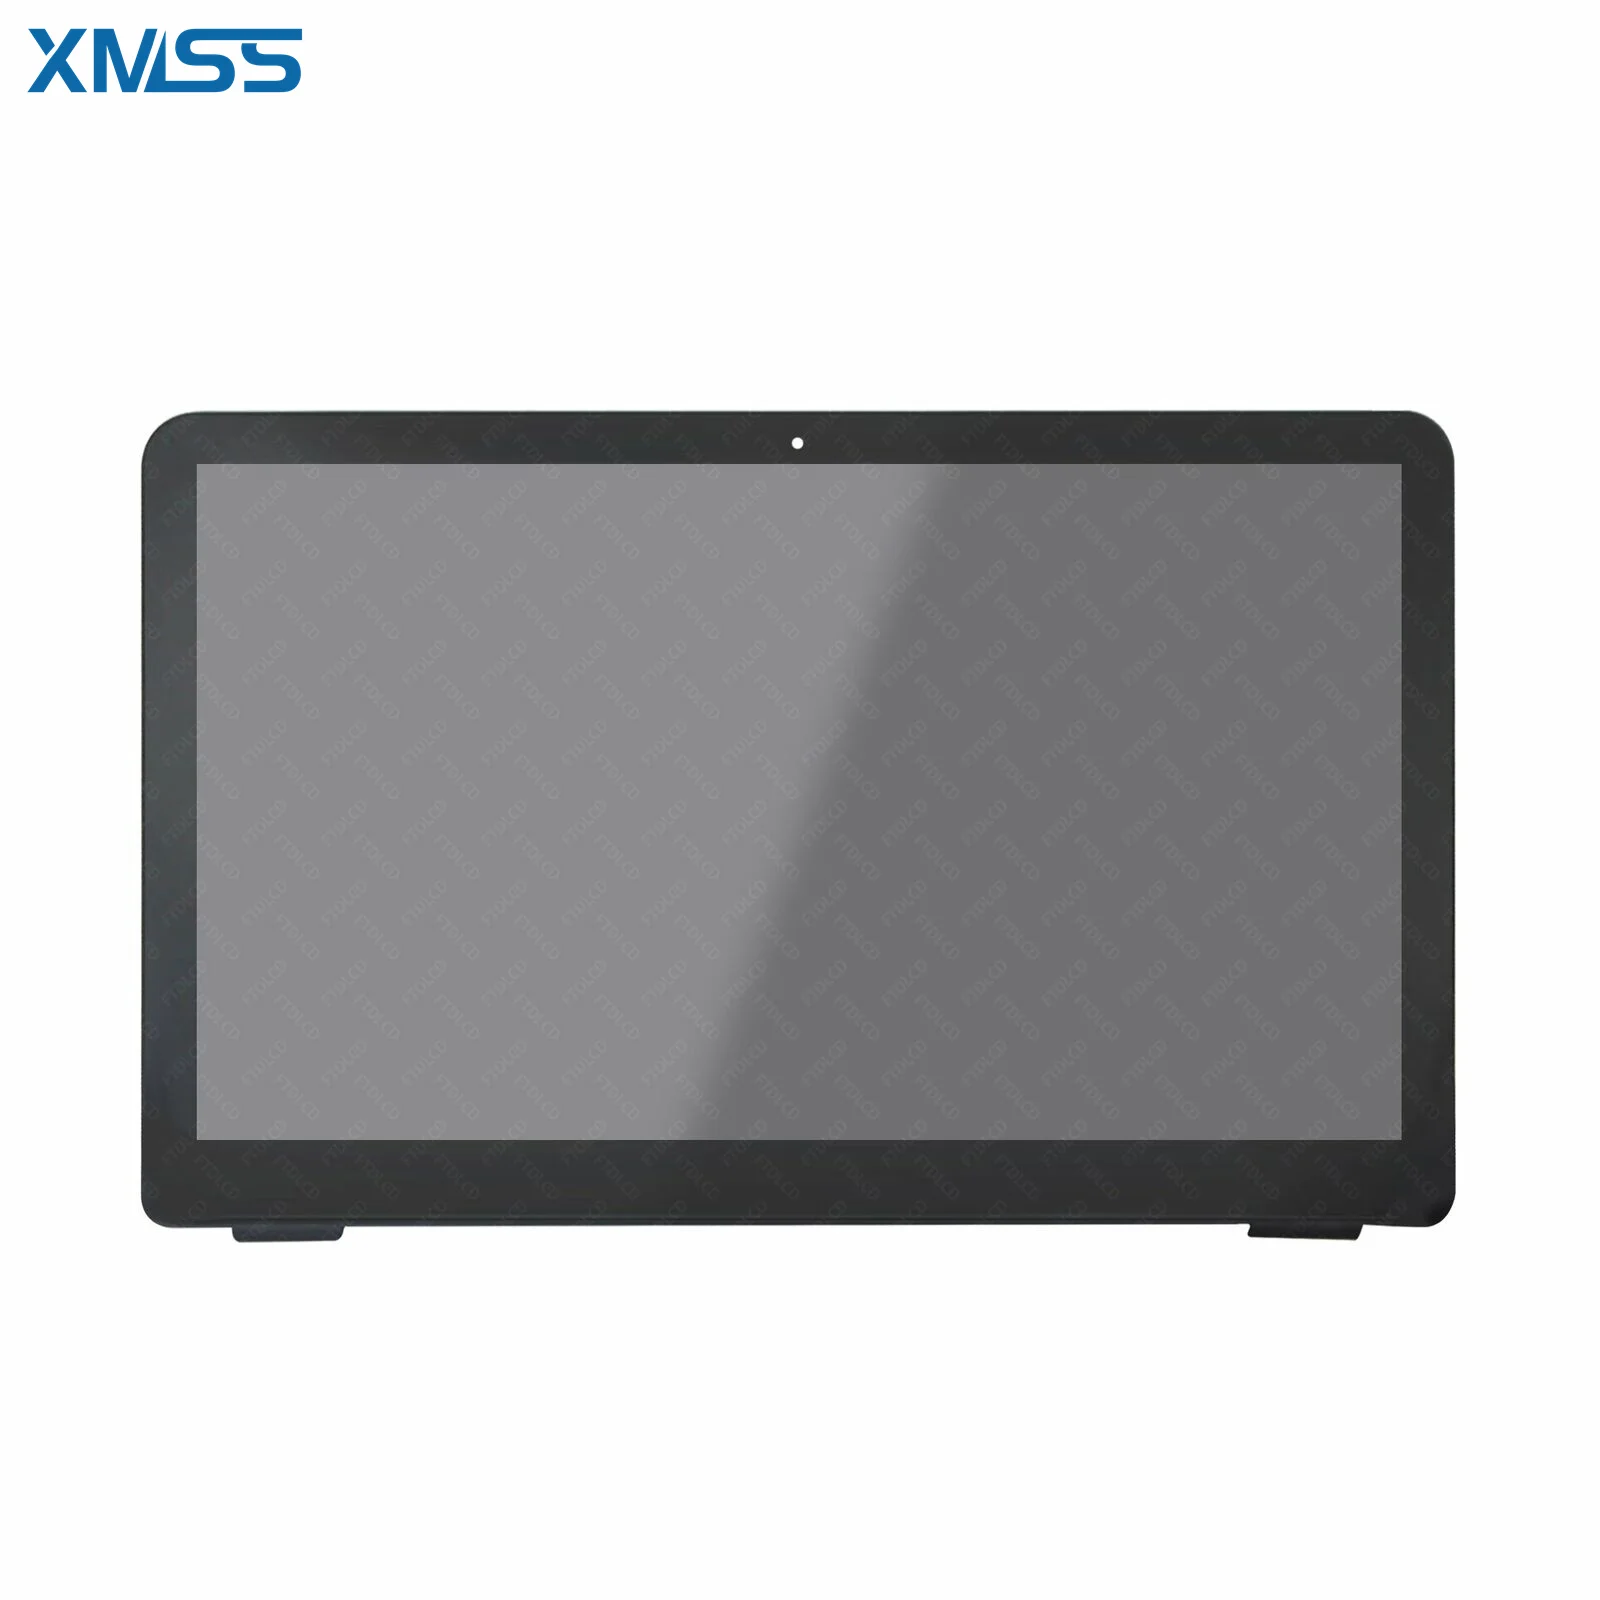 

15.6" IPS LCD Touch Screen Digitizer Display Assembly for HP Pavilion x360 15-bk